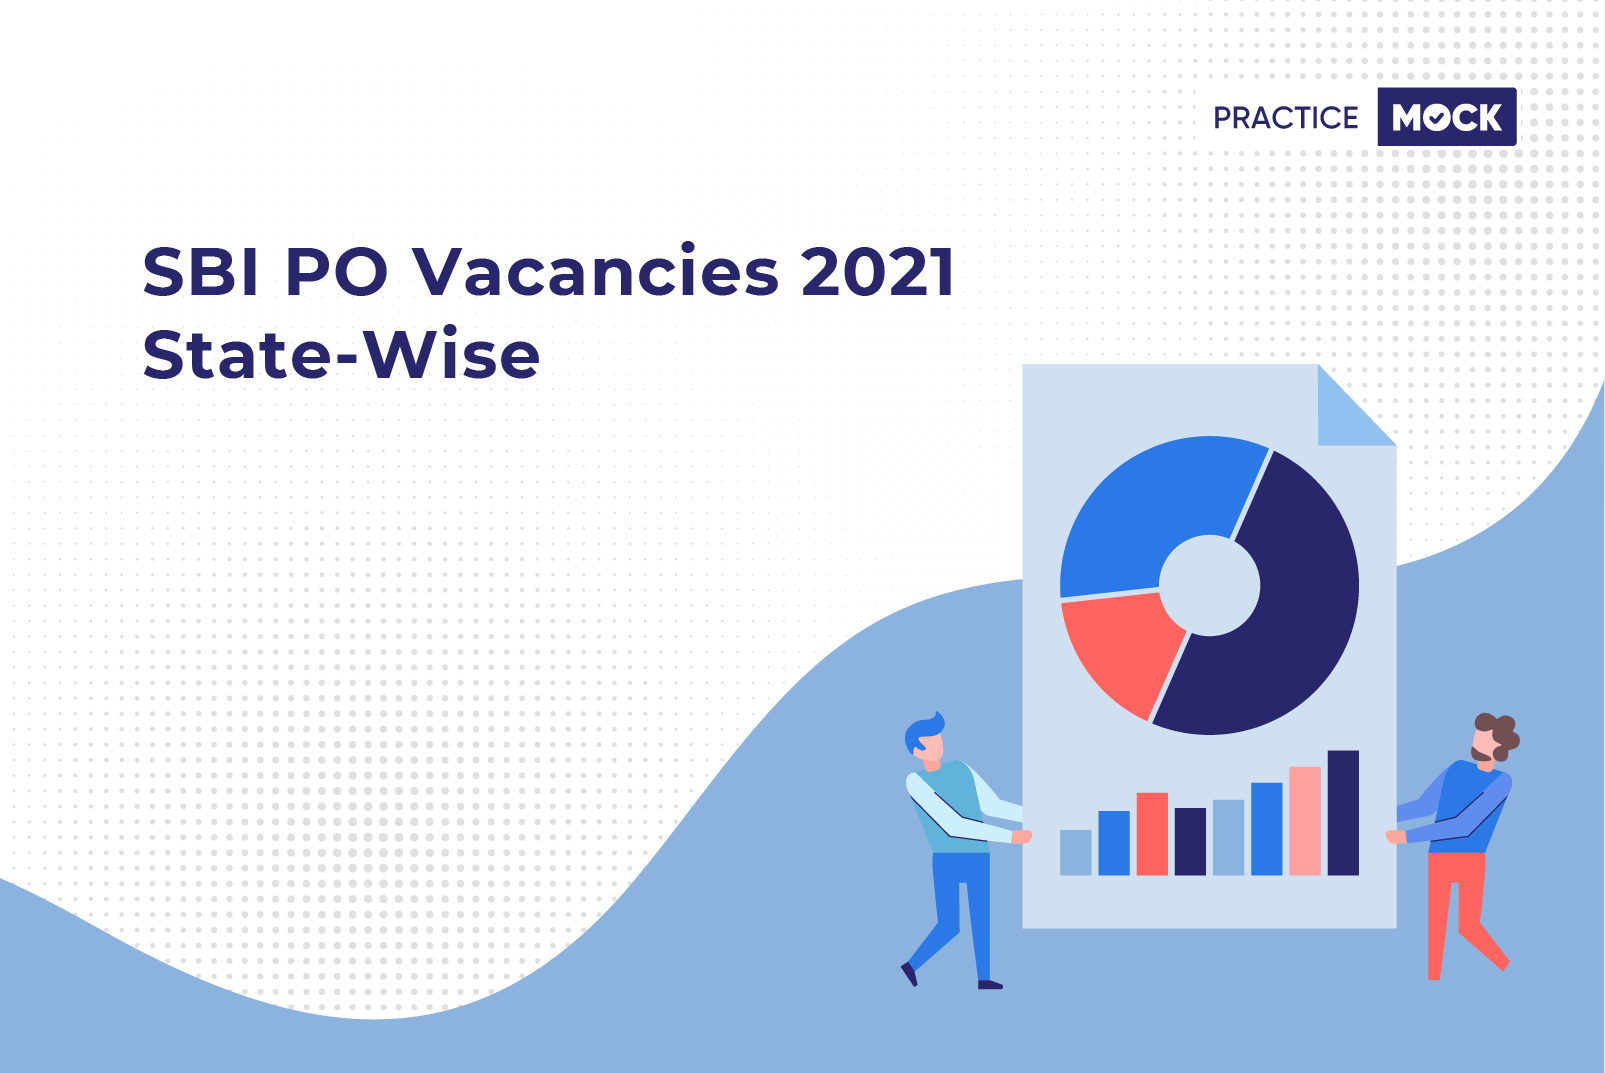 SBI PO Vacancies 2021 Category-Wise